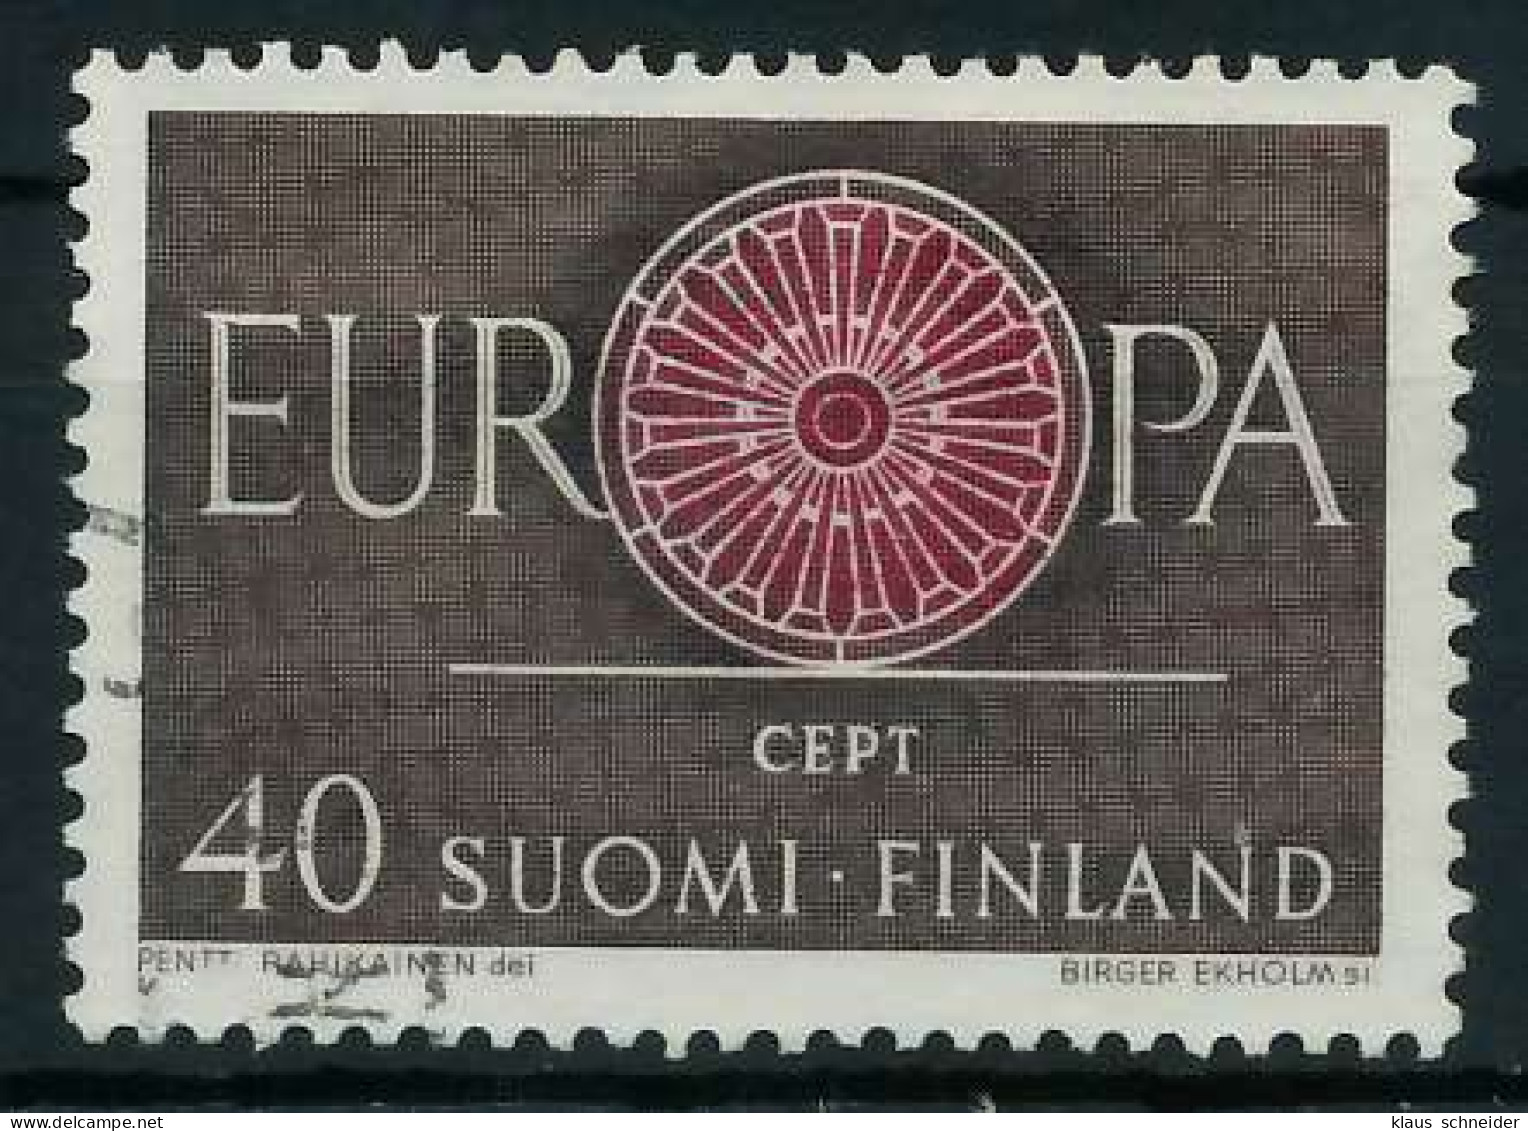 FINNLAND 1960 Nr 526 Gestempelt X9A2C76 - Used Stamps